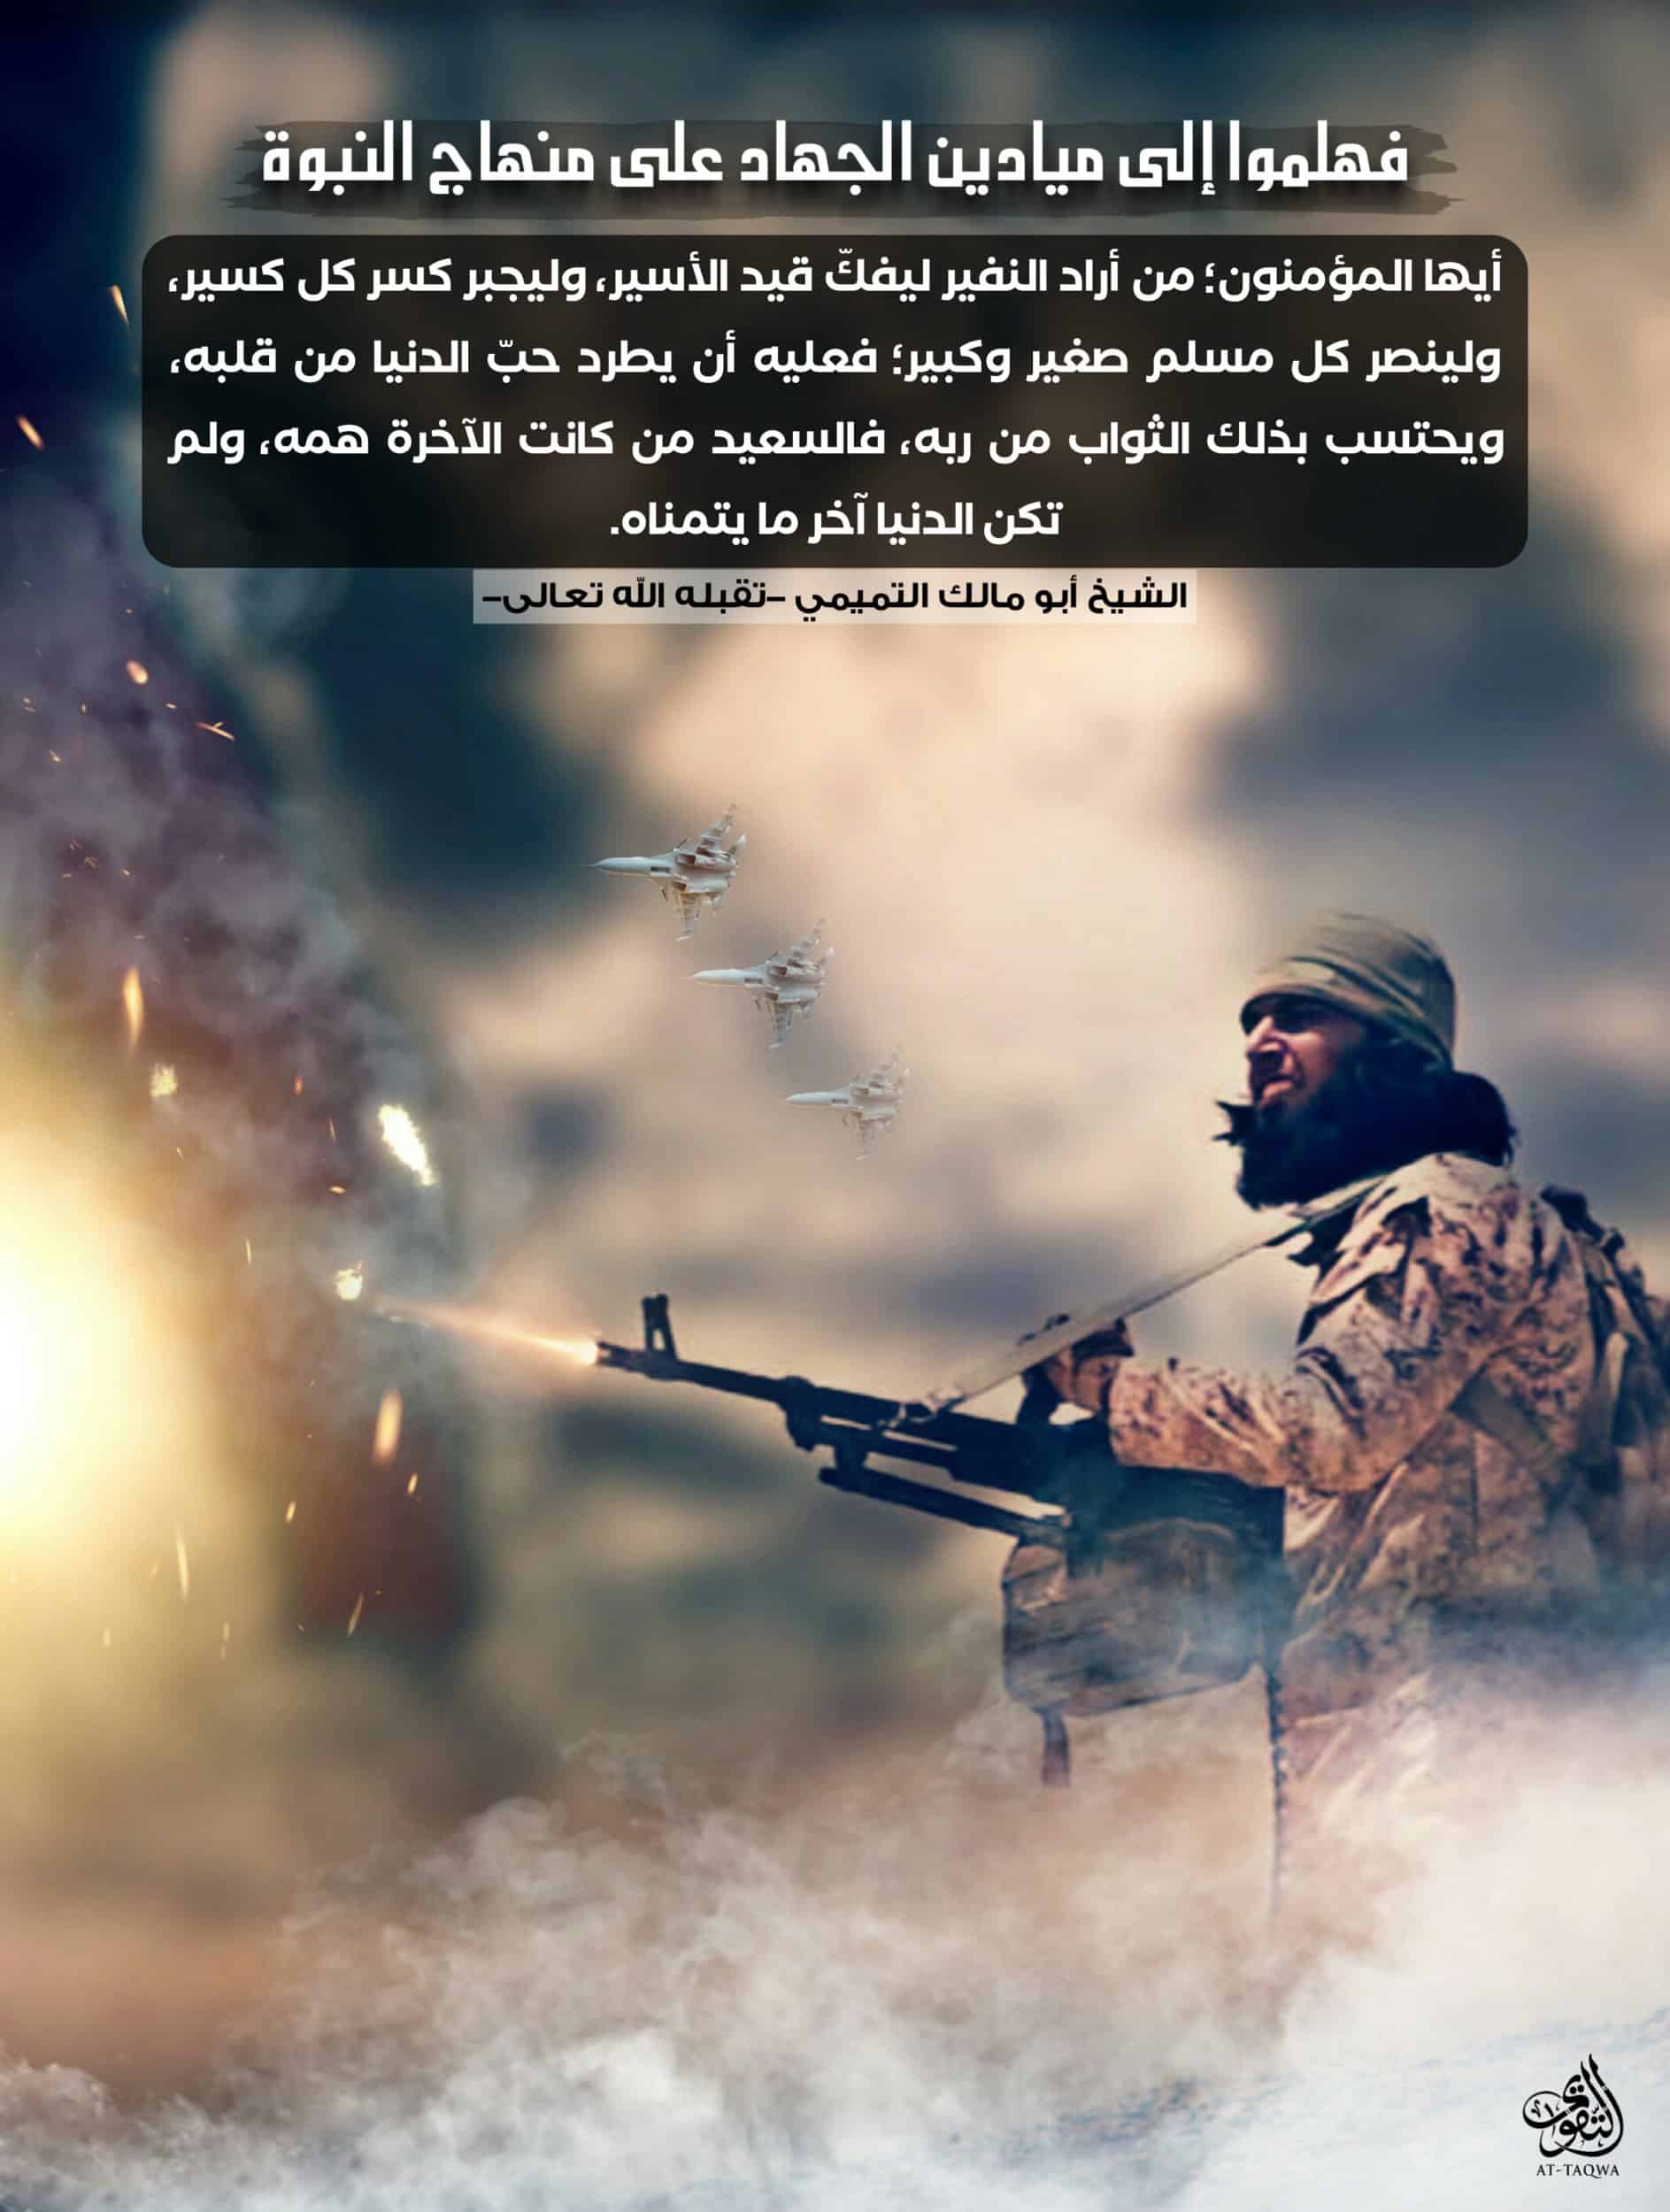 (Poster) al-Taqwa Media (Unofficial Islamic State): "Come to the Field of Jihad on the Doctine of the Prophet" - 14 April 2022